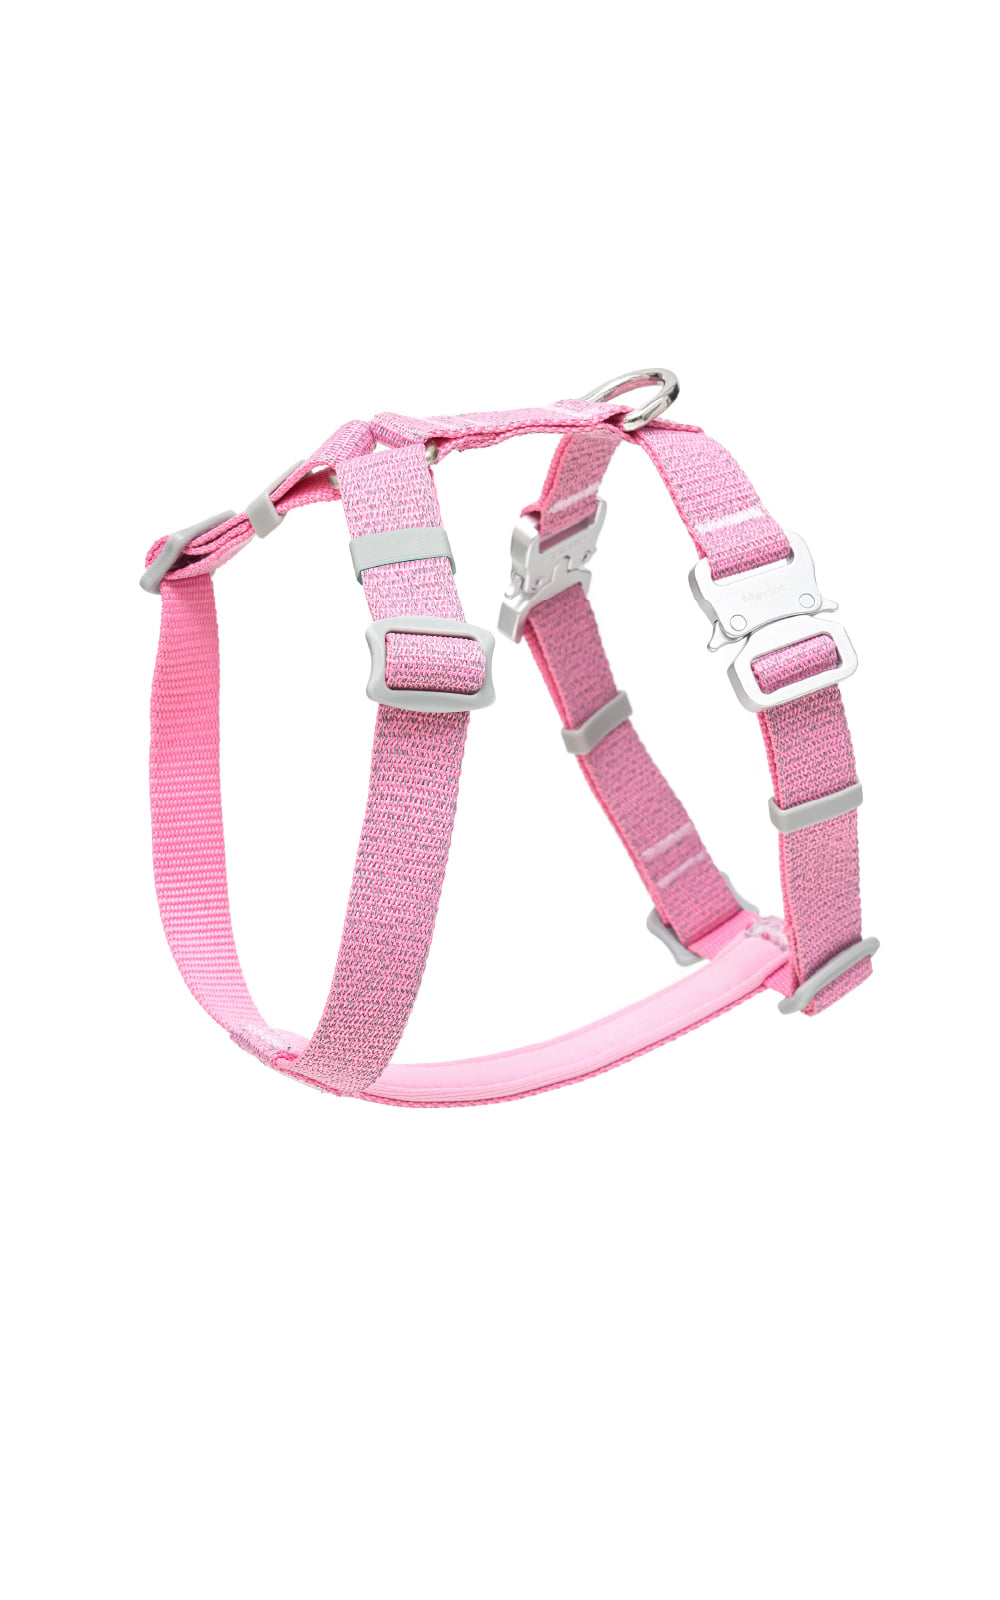 Holy H-Harness Pink